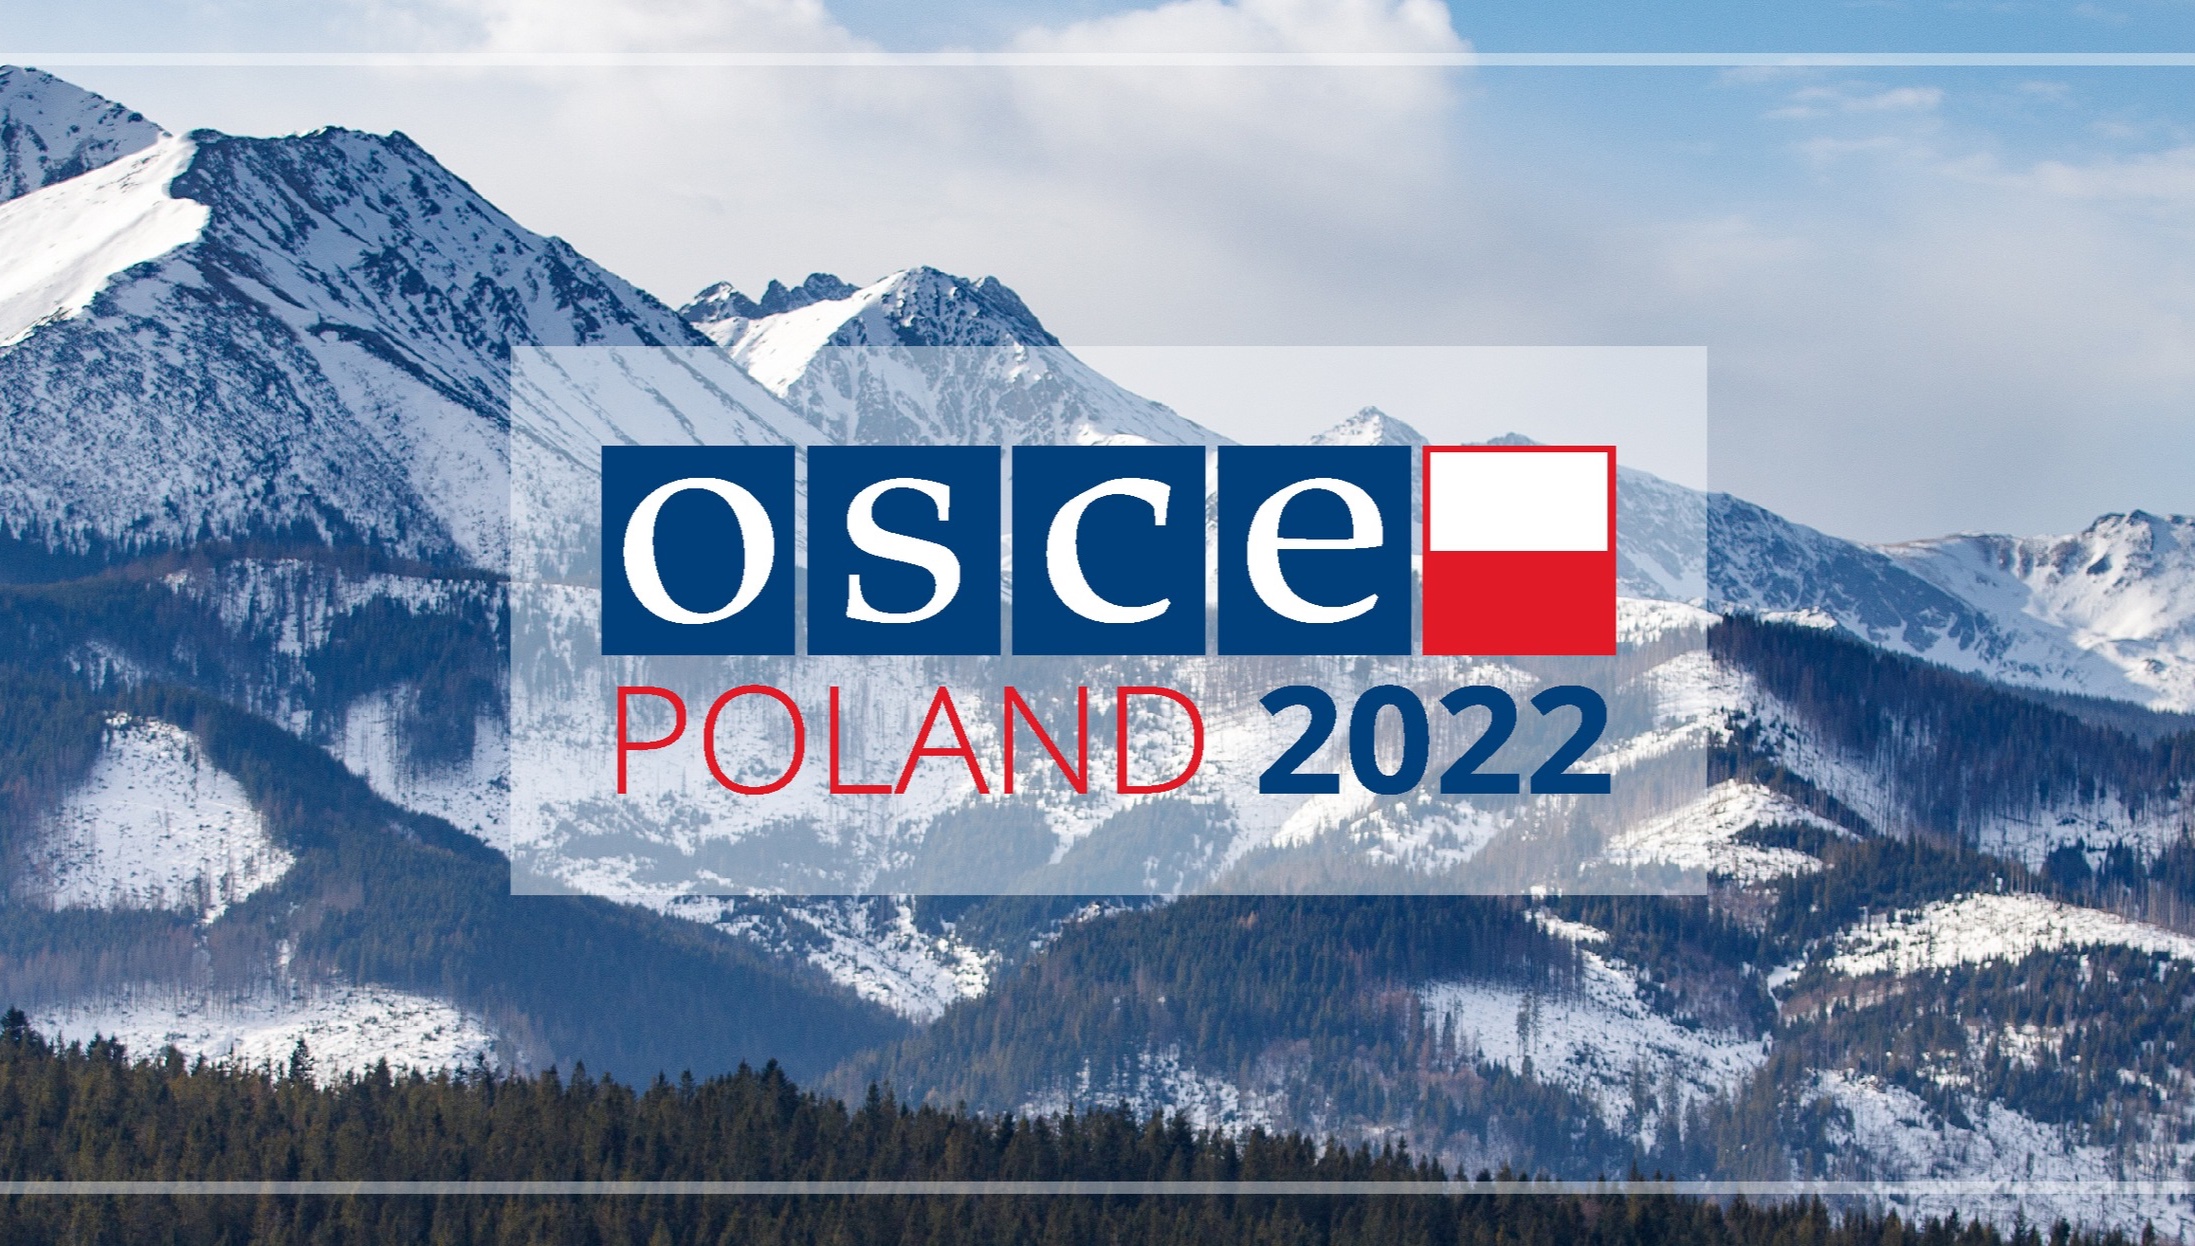 29th OSCE Ministerial Council in Lodz